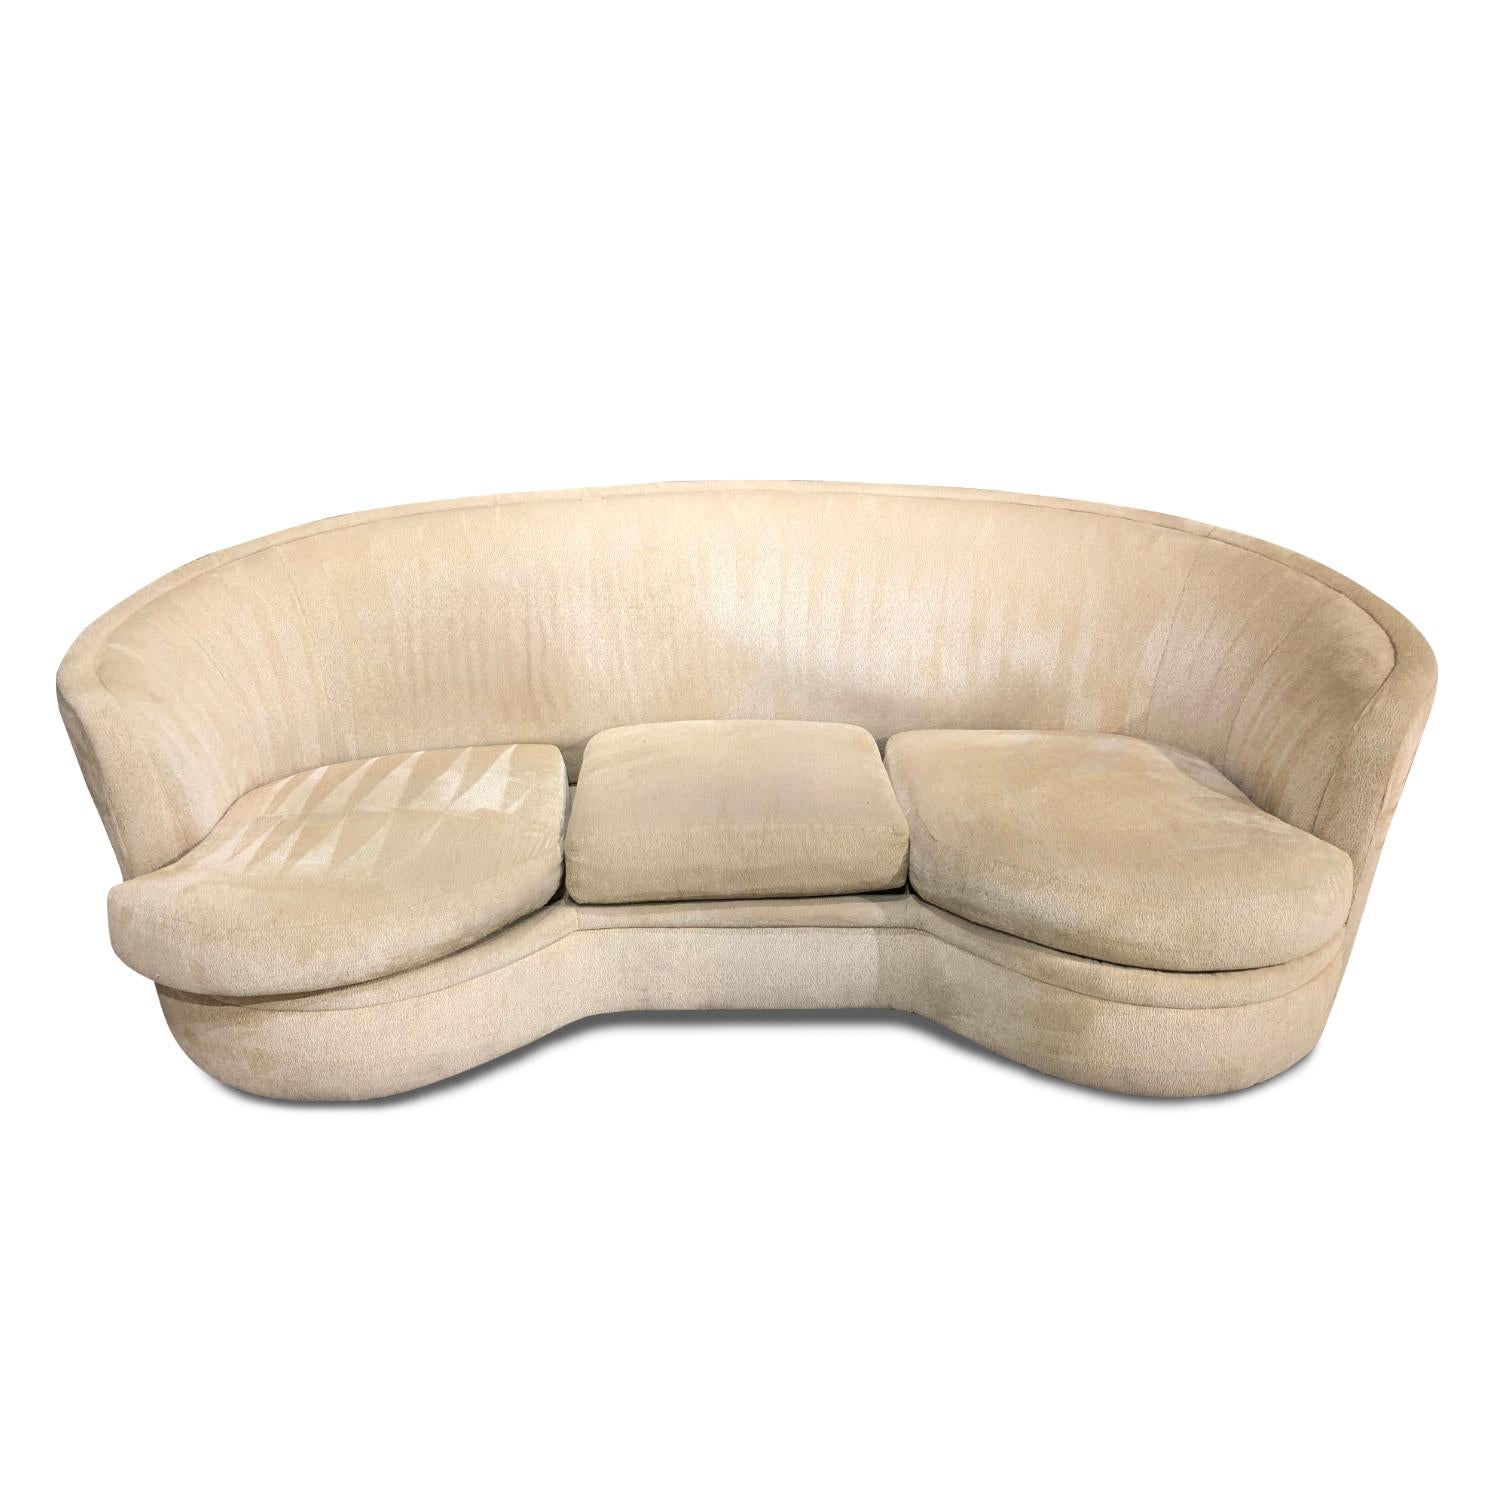 The crescent shaped, curved sofa was made famous by legendary designers. Kidney bean shaped couches have long been desired by Mid-Century Modern collectors, but this beauty traverses all styles. The sofa has been professionally steamed clean is